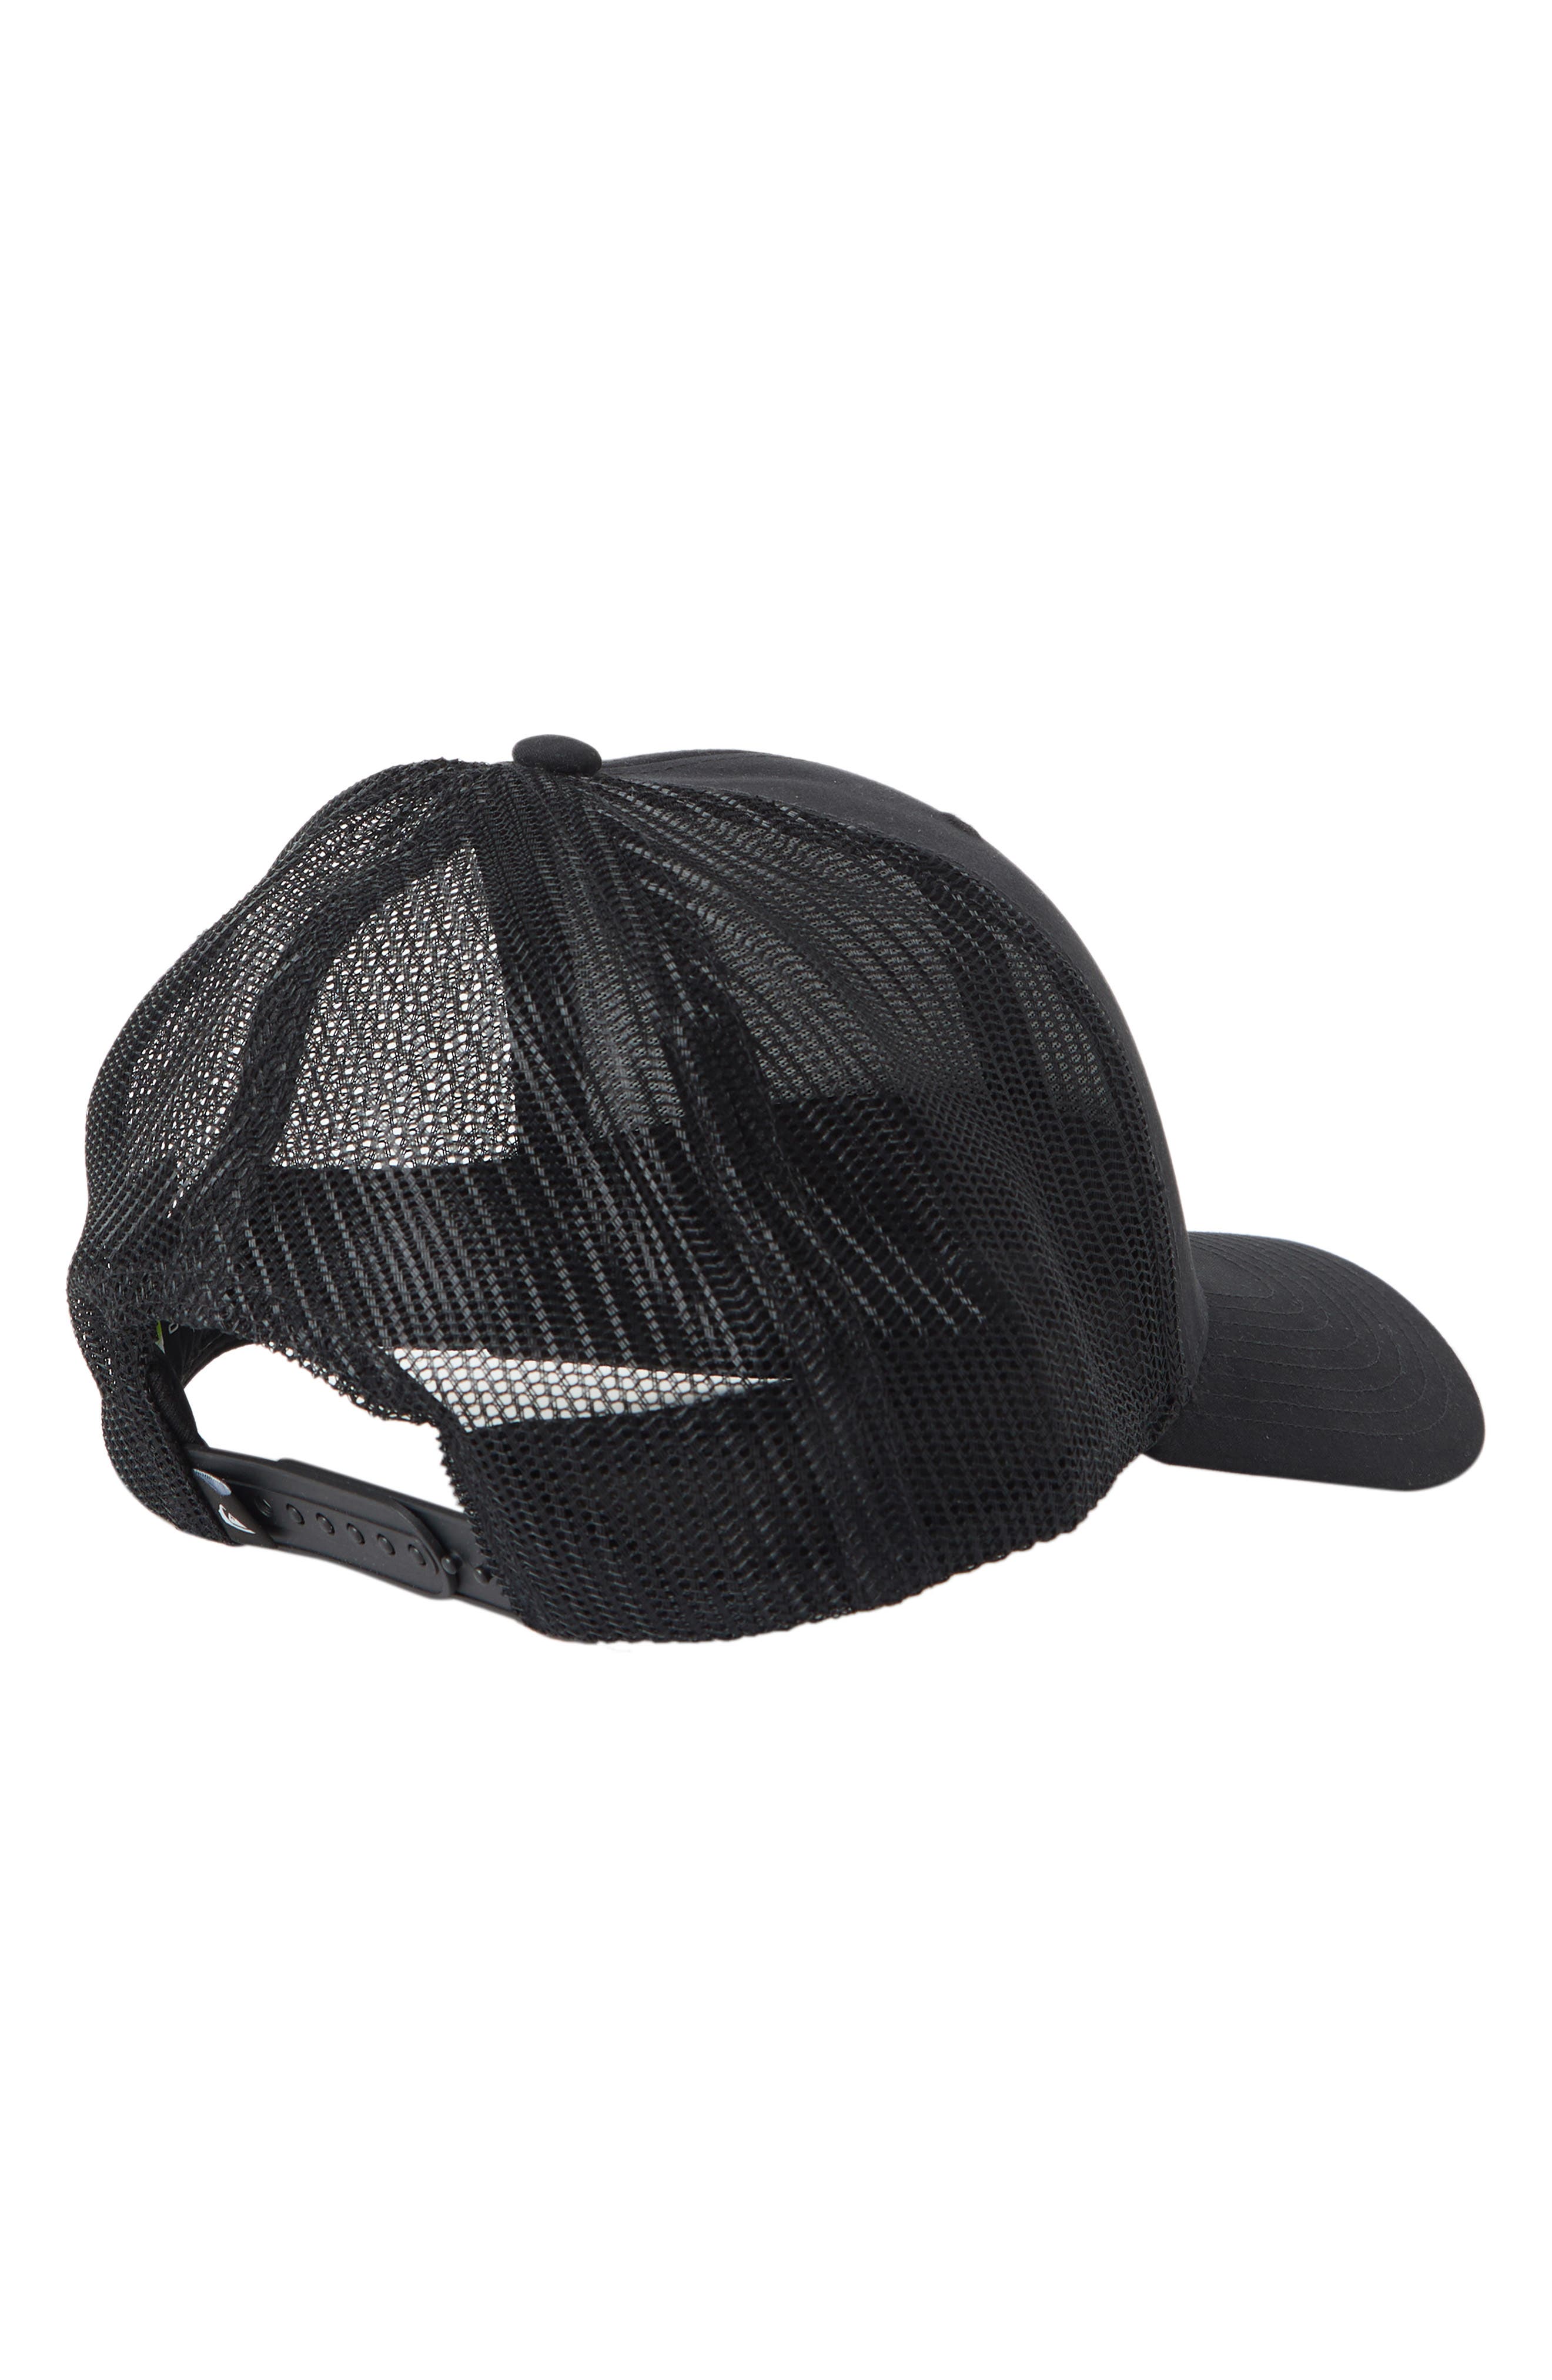 Quiksilver Towed In Recycled in Polyester | Trucket Smart Black Hat Closet